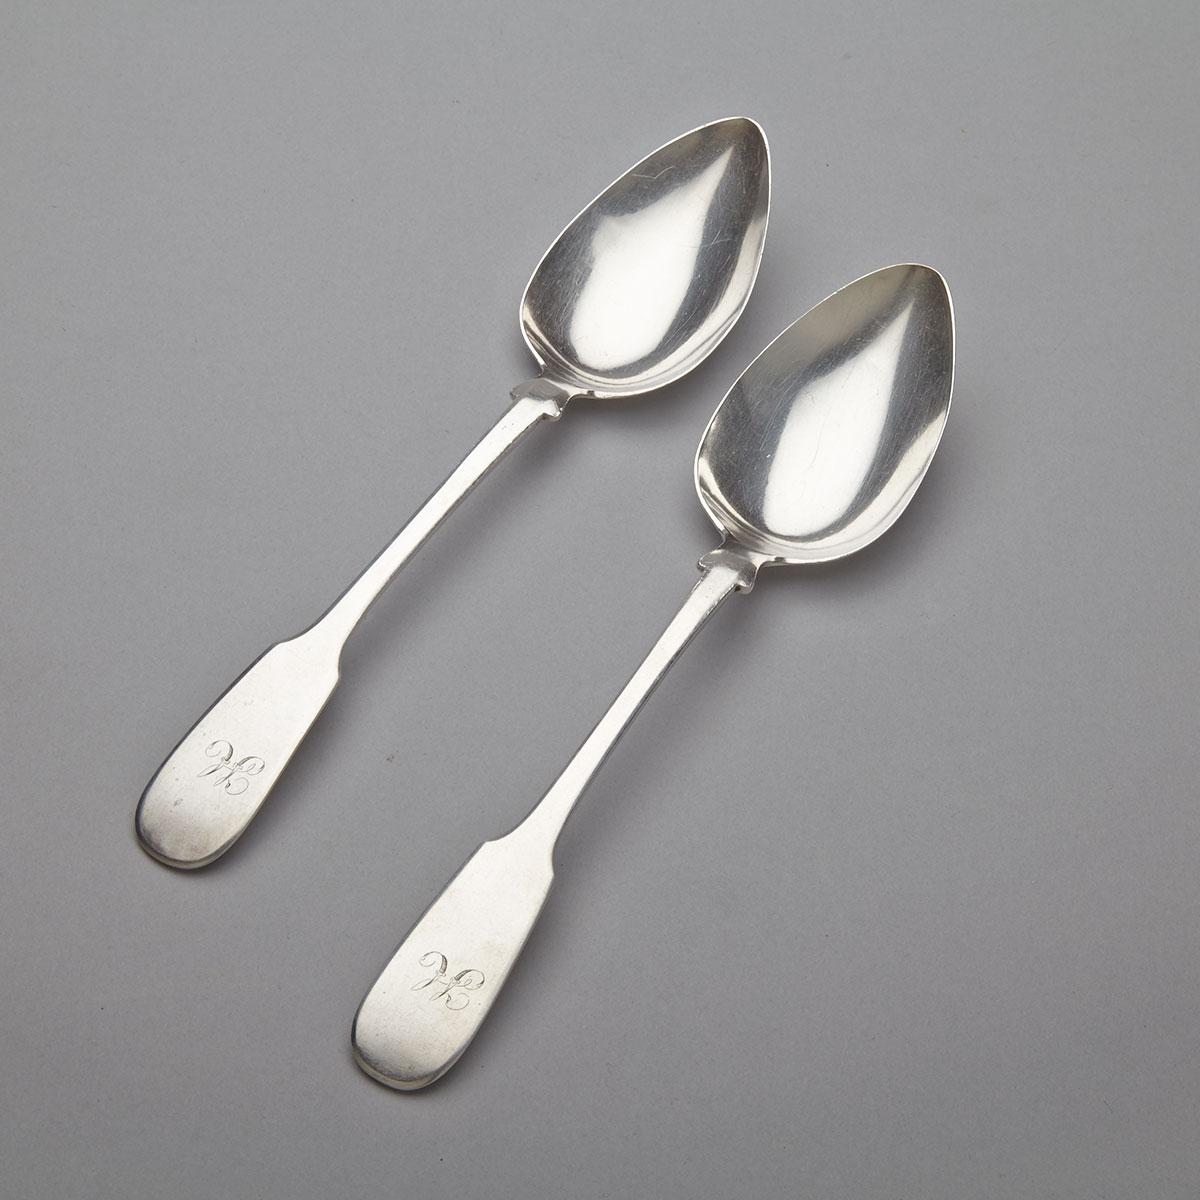 Pair of Canadian Silver Fiddle Pattern Table Spoons, William C. Morrison, Toronto, Ont., mid-19th century